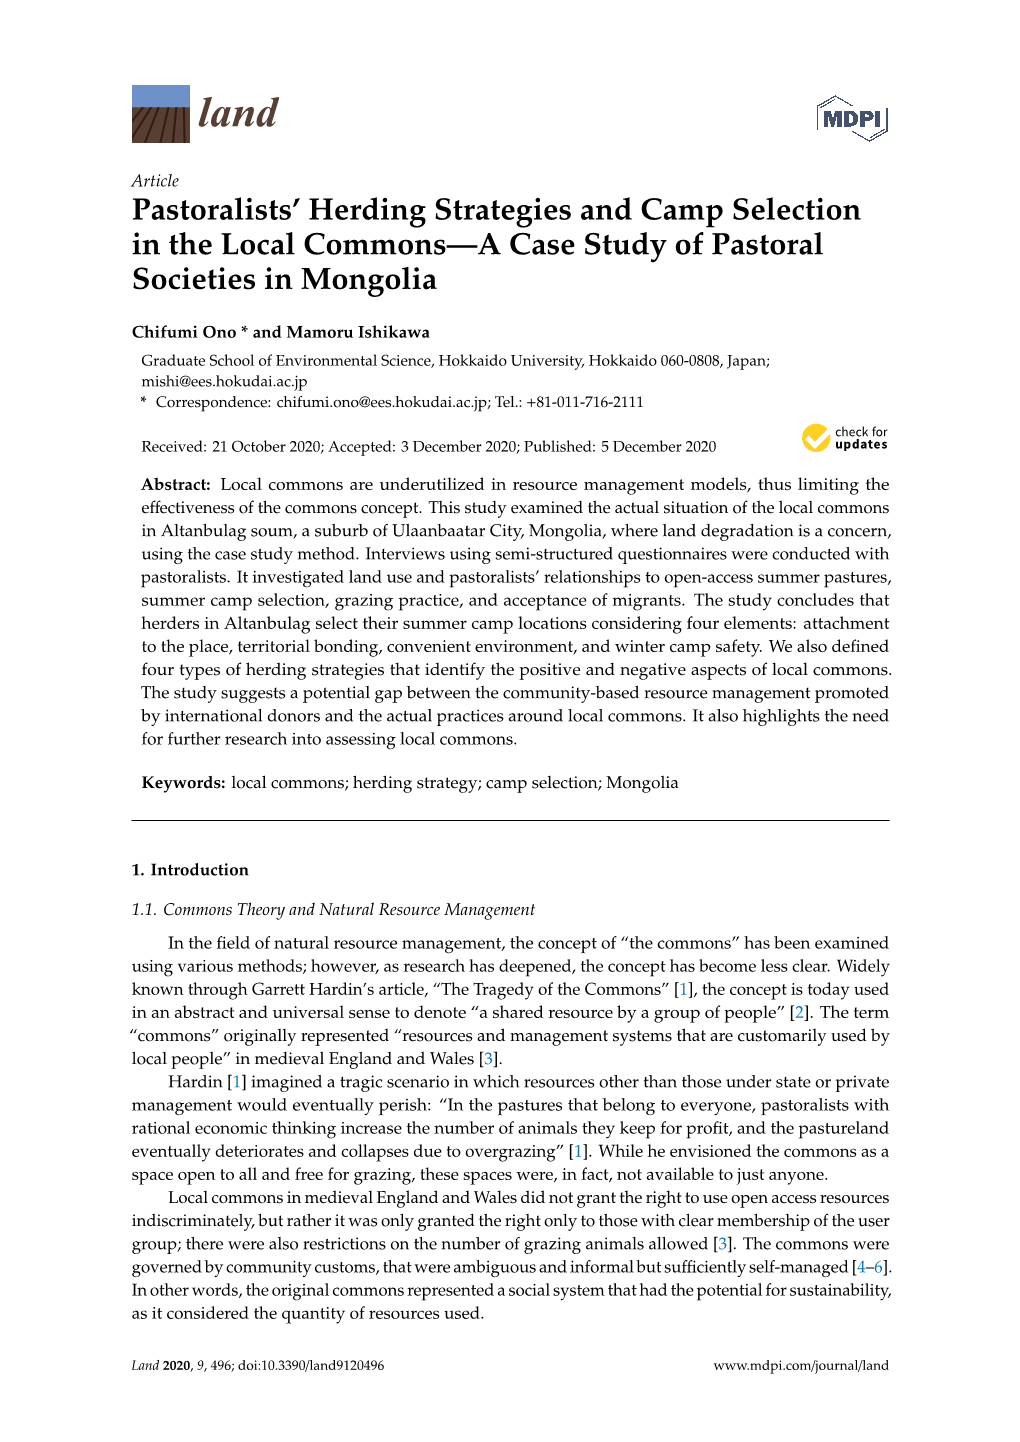 Pastoralists' Herding Strategies and Camp Selection in the Local Commons—A Case Study of Pastoral Societies in Mongolia